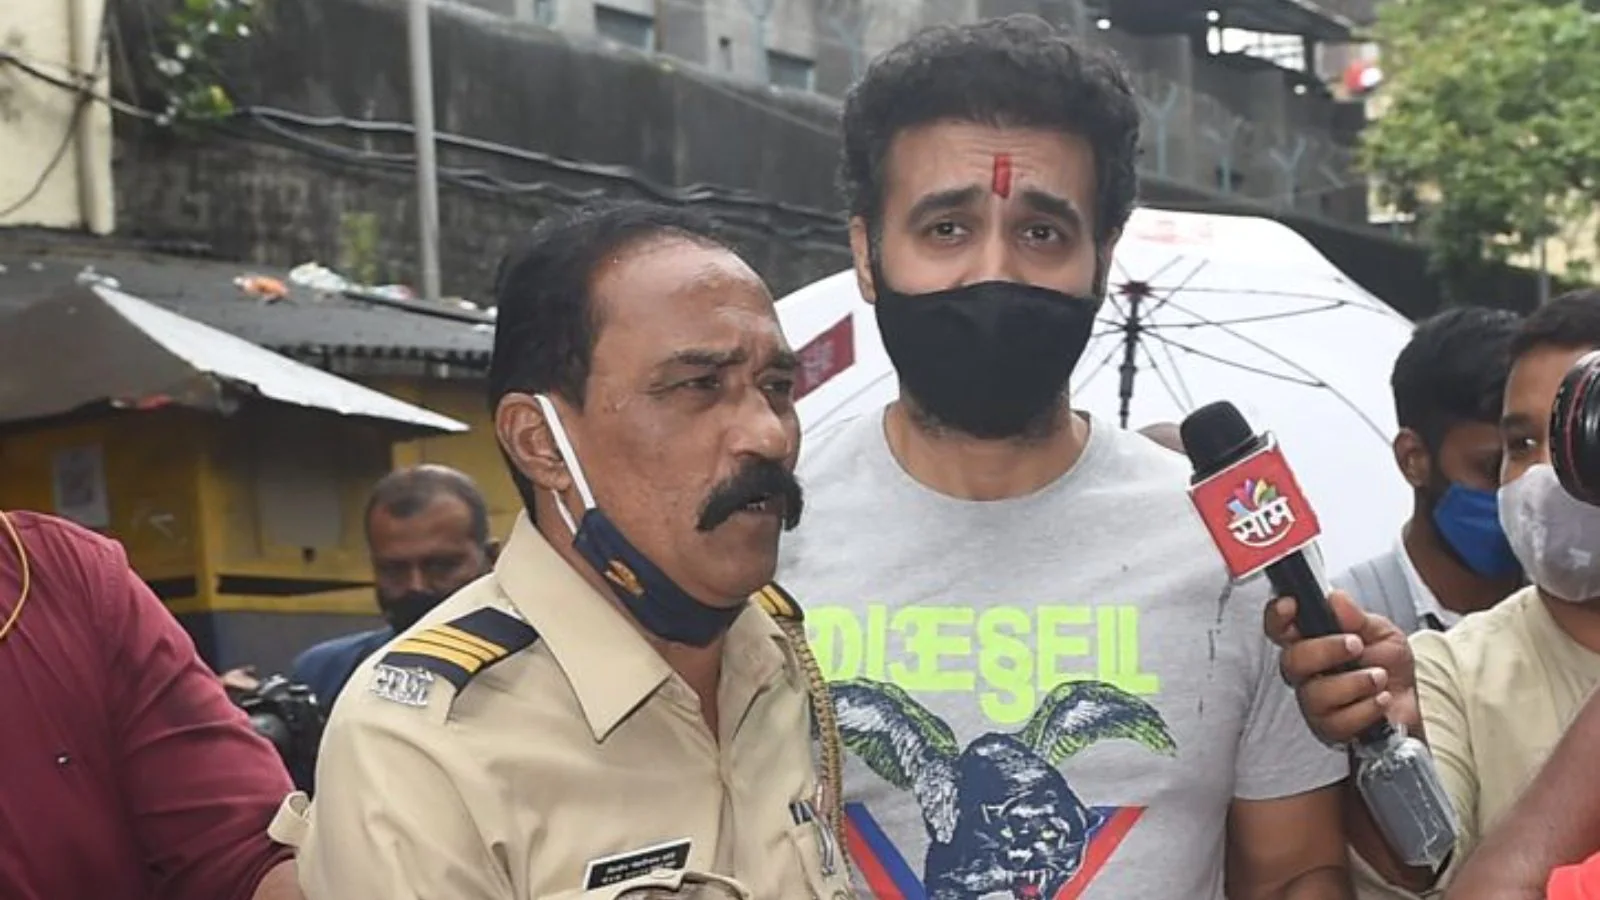 Casting Director, 3 Others Arrested in Mumbai; Shocking Details Revealed